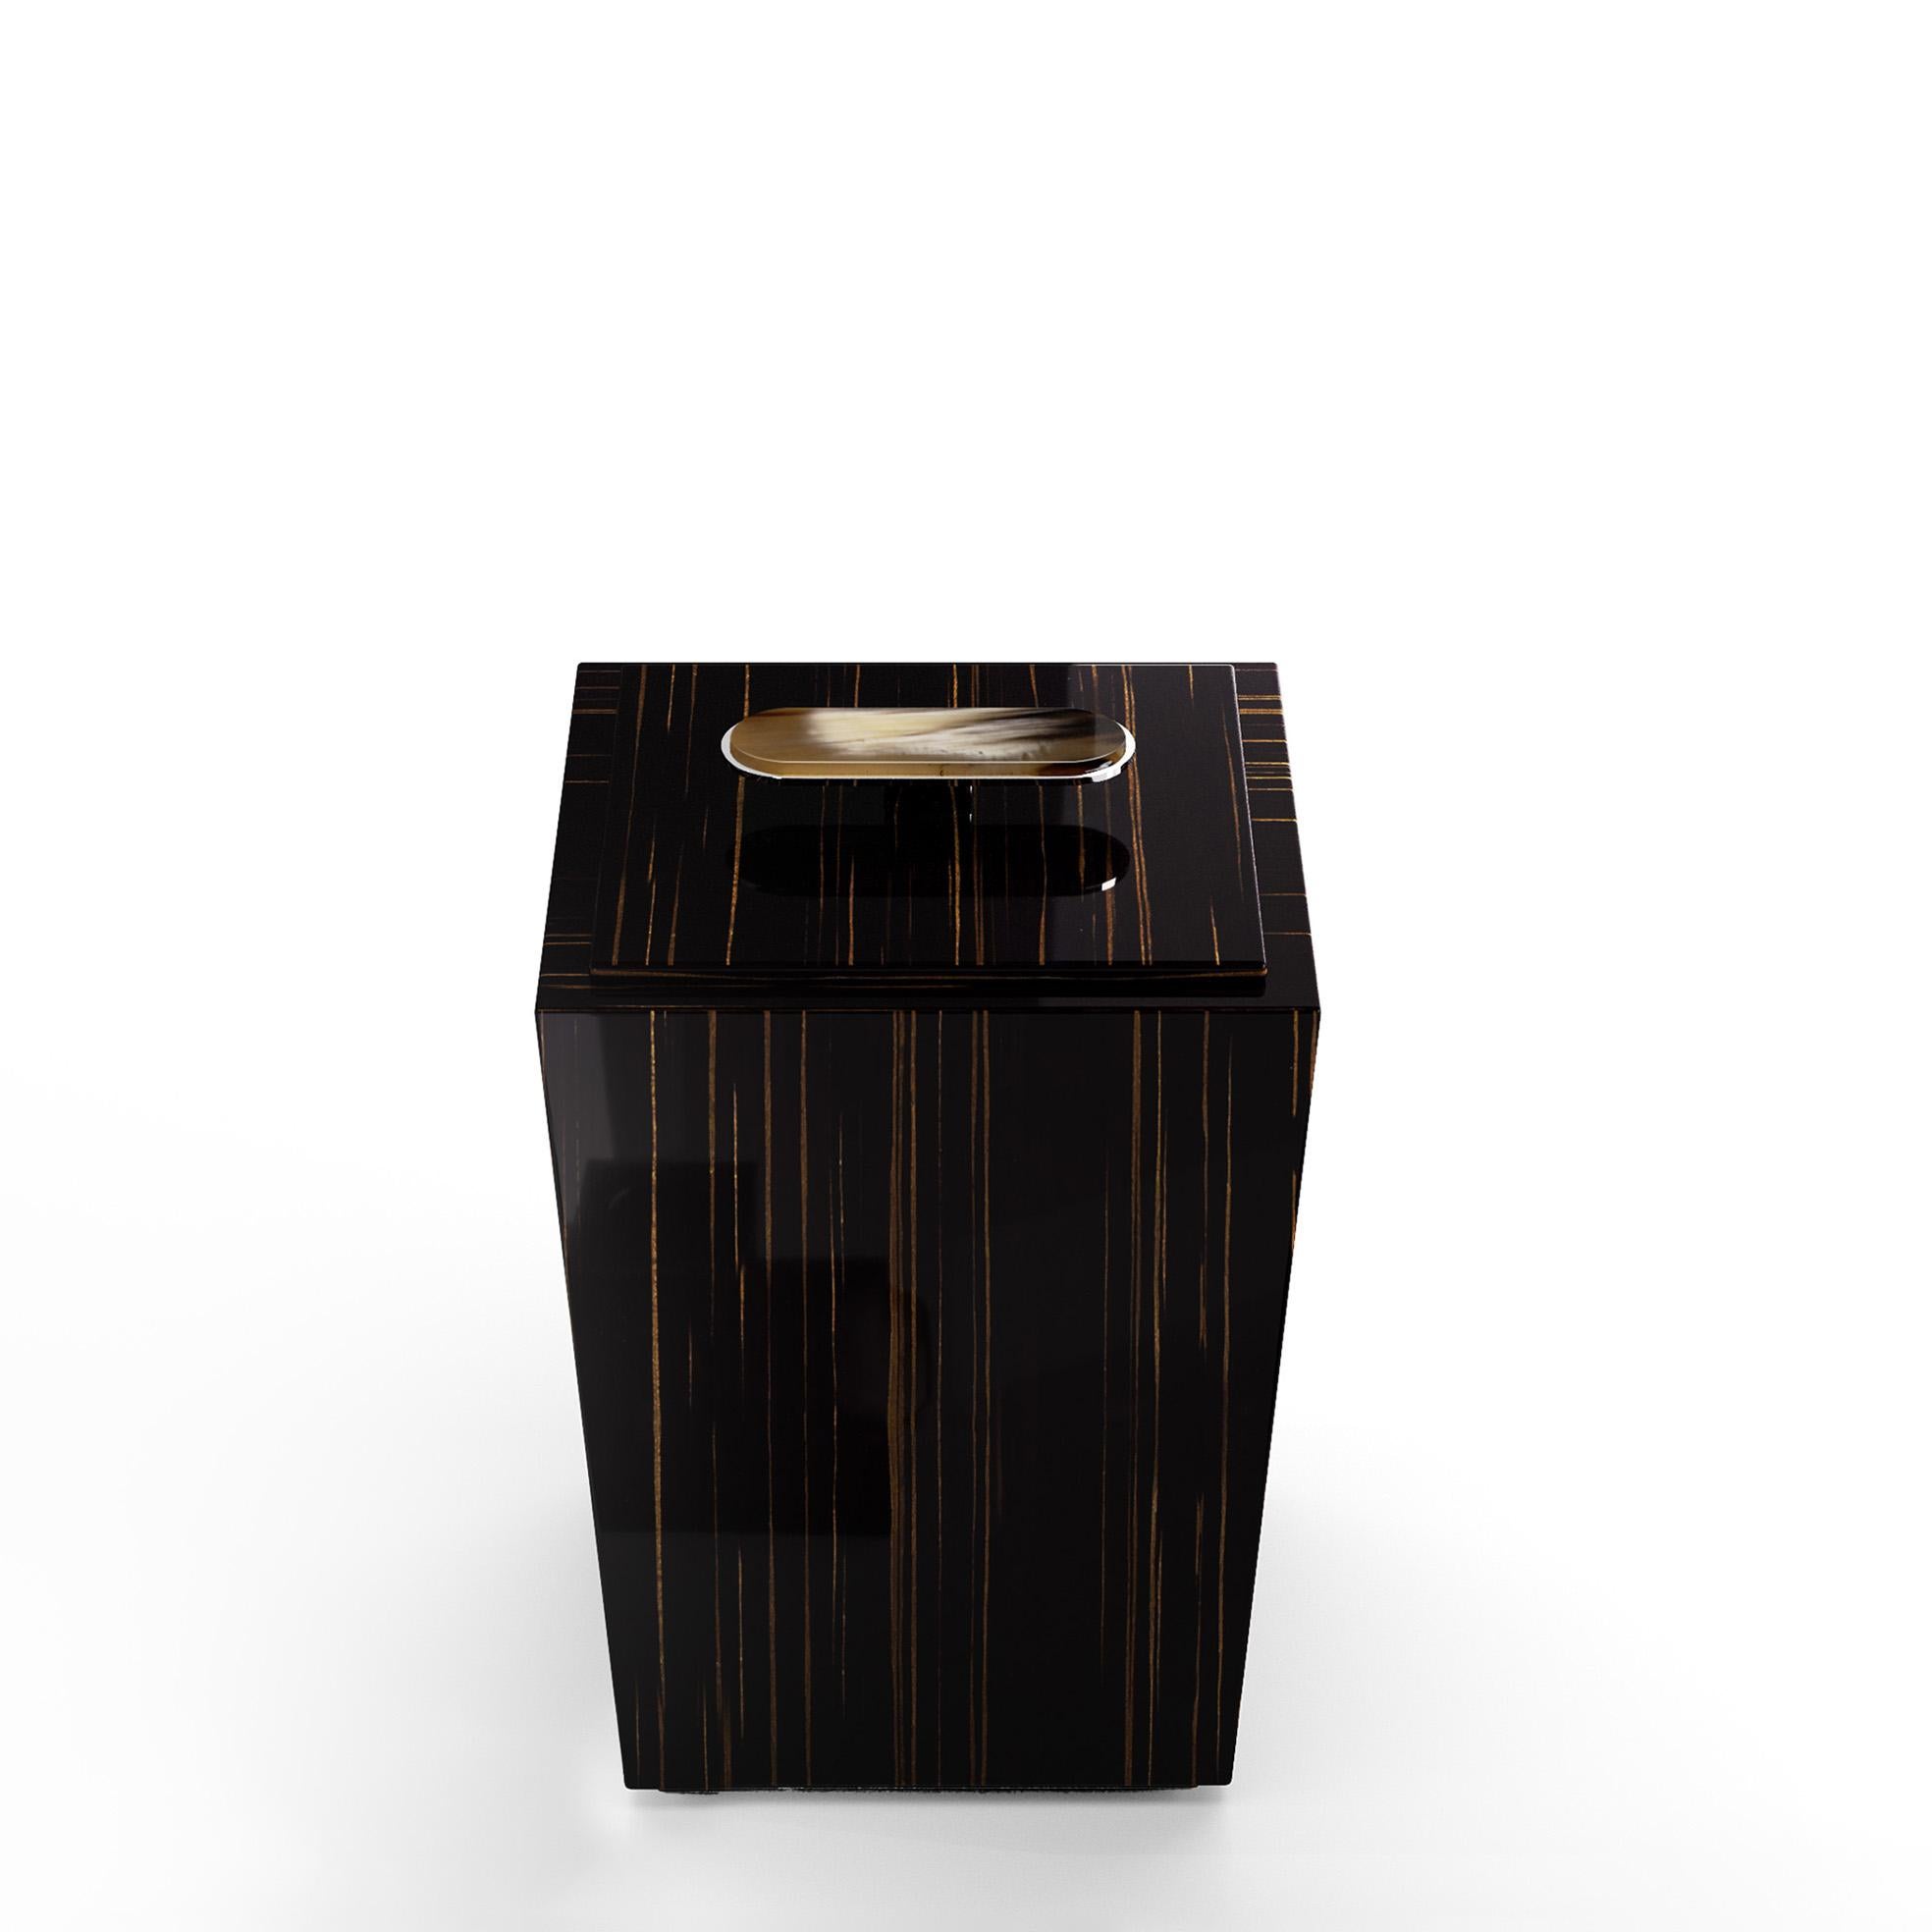 Chrome Bicco Waste Paper Basket in Black Lacquered Wood and Corno Italiano, Mod. 2426 For Sale